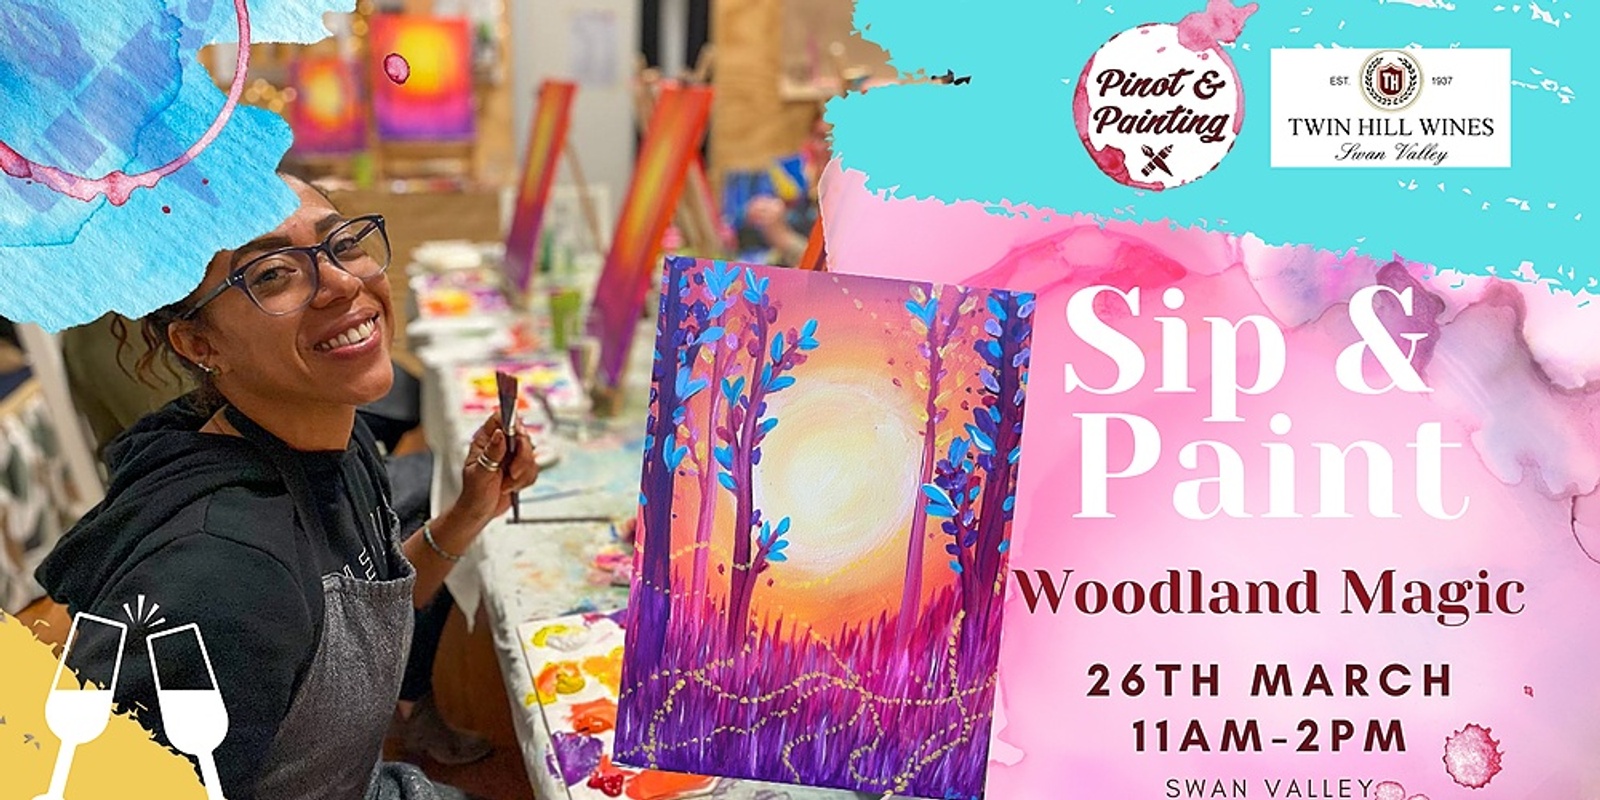 Banner image for Woodland Magic - Social Art @ Twin Hill Wines 